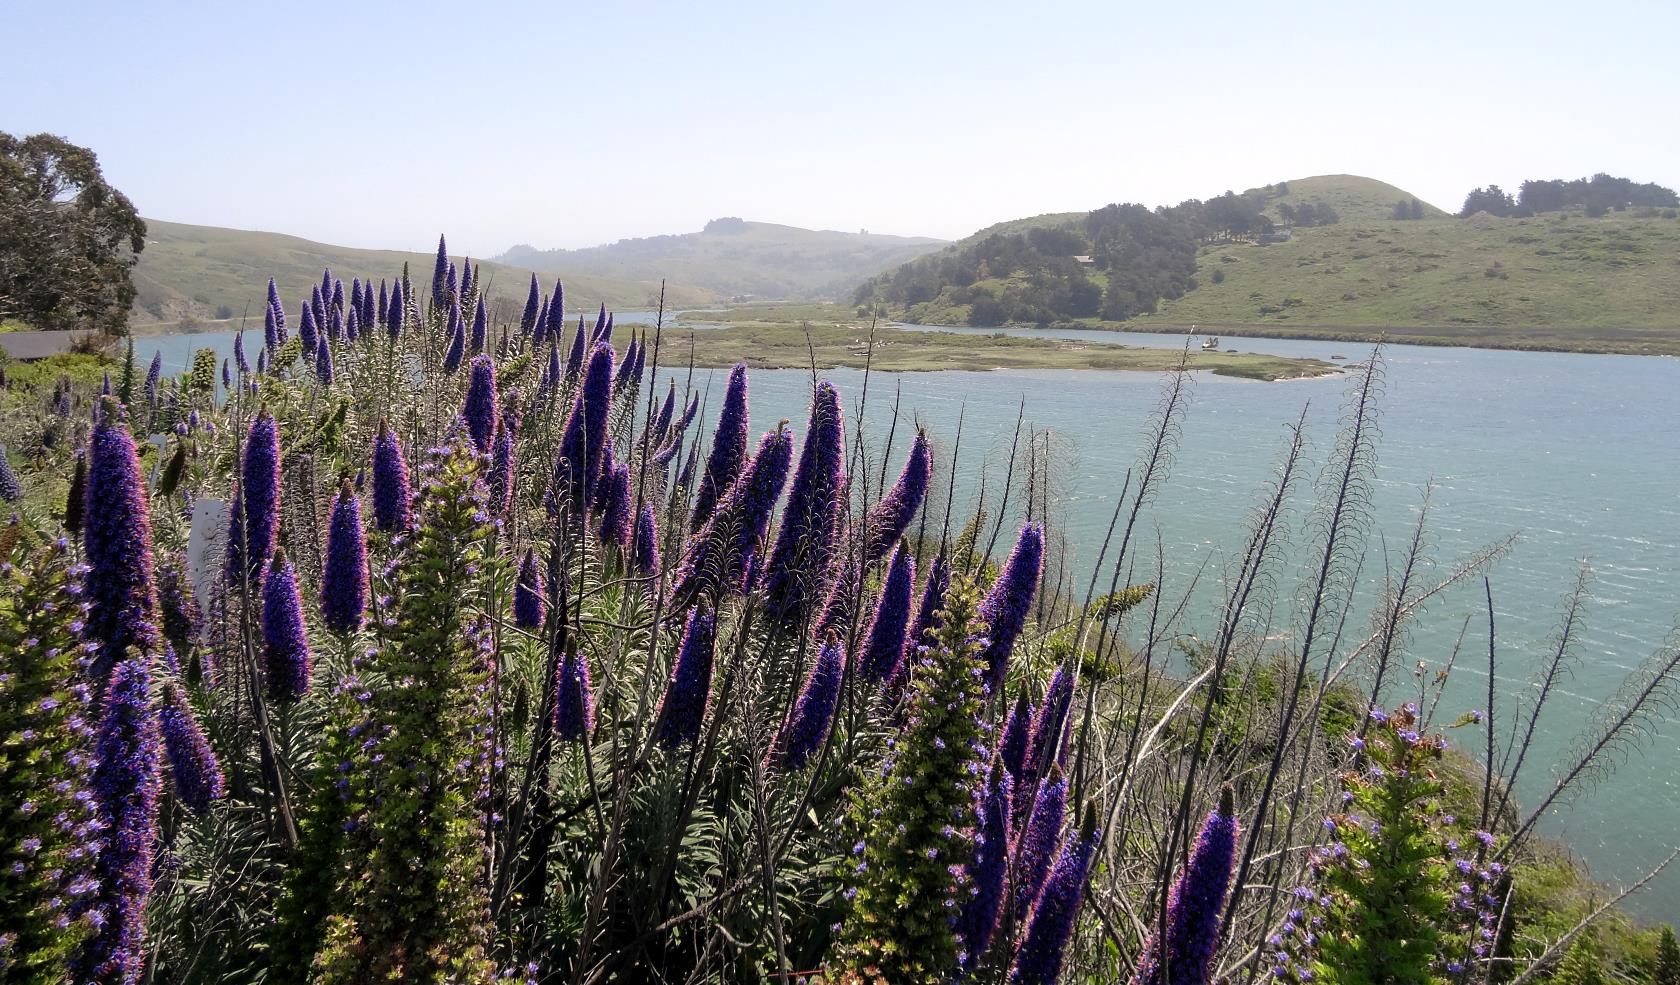 Lupins grow above the Russian River. The mild moist conditions of the coast support beautiful displays of many wild flowers.